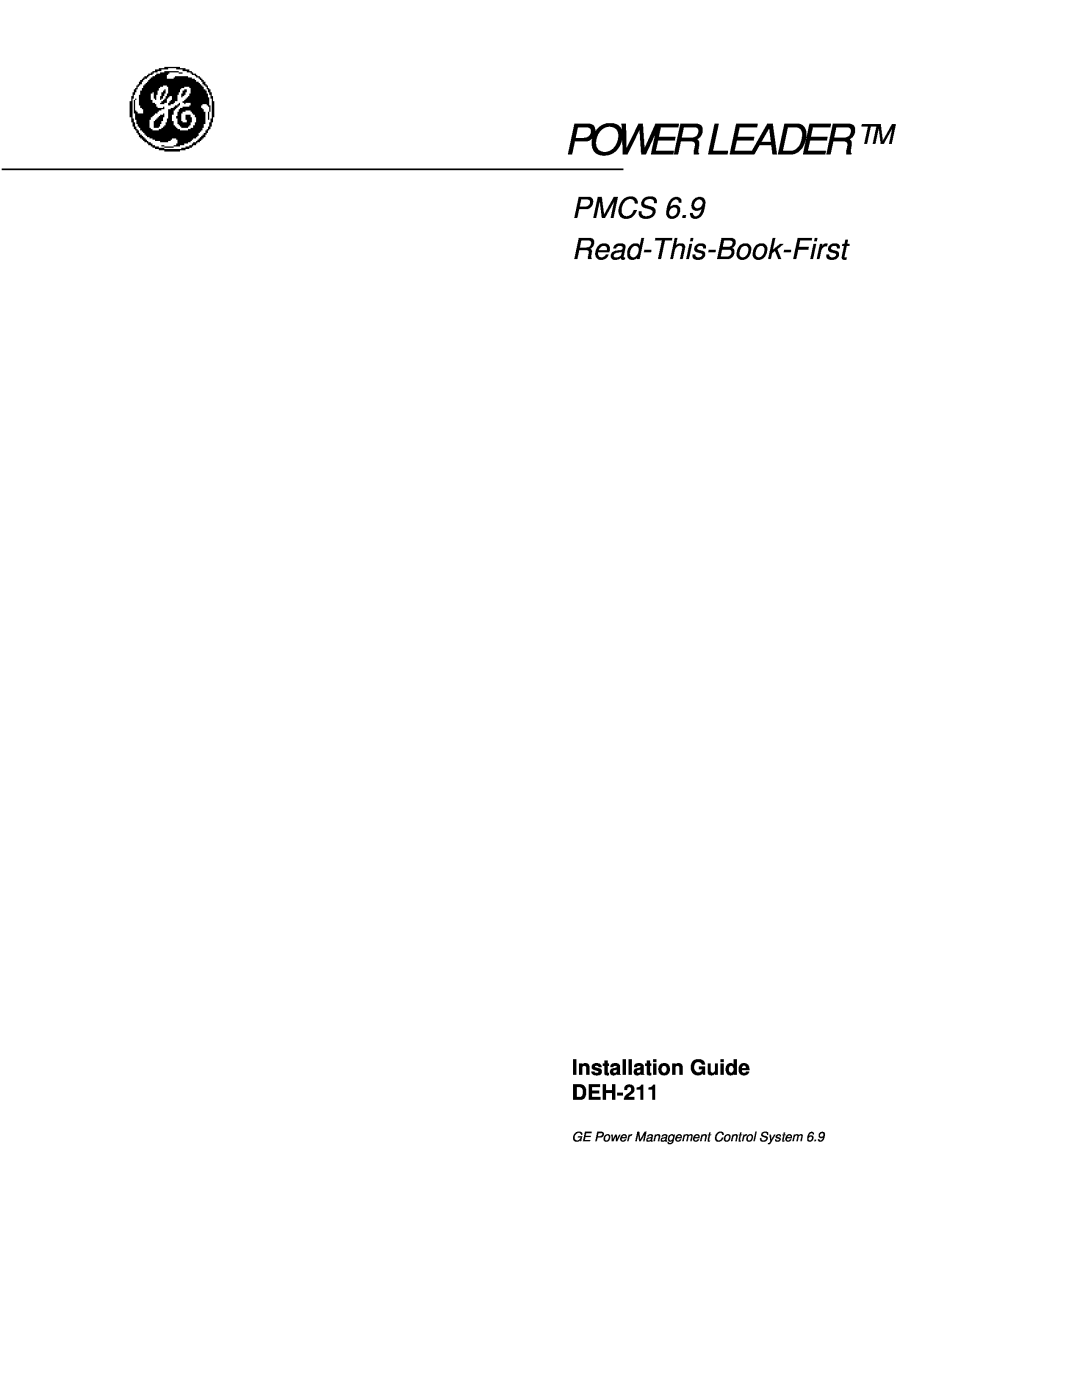 GE manual Installation Guide DEH-211, Power Leader Tm, PMCS 6.9 Read-This-Book-First 